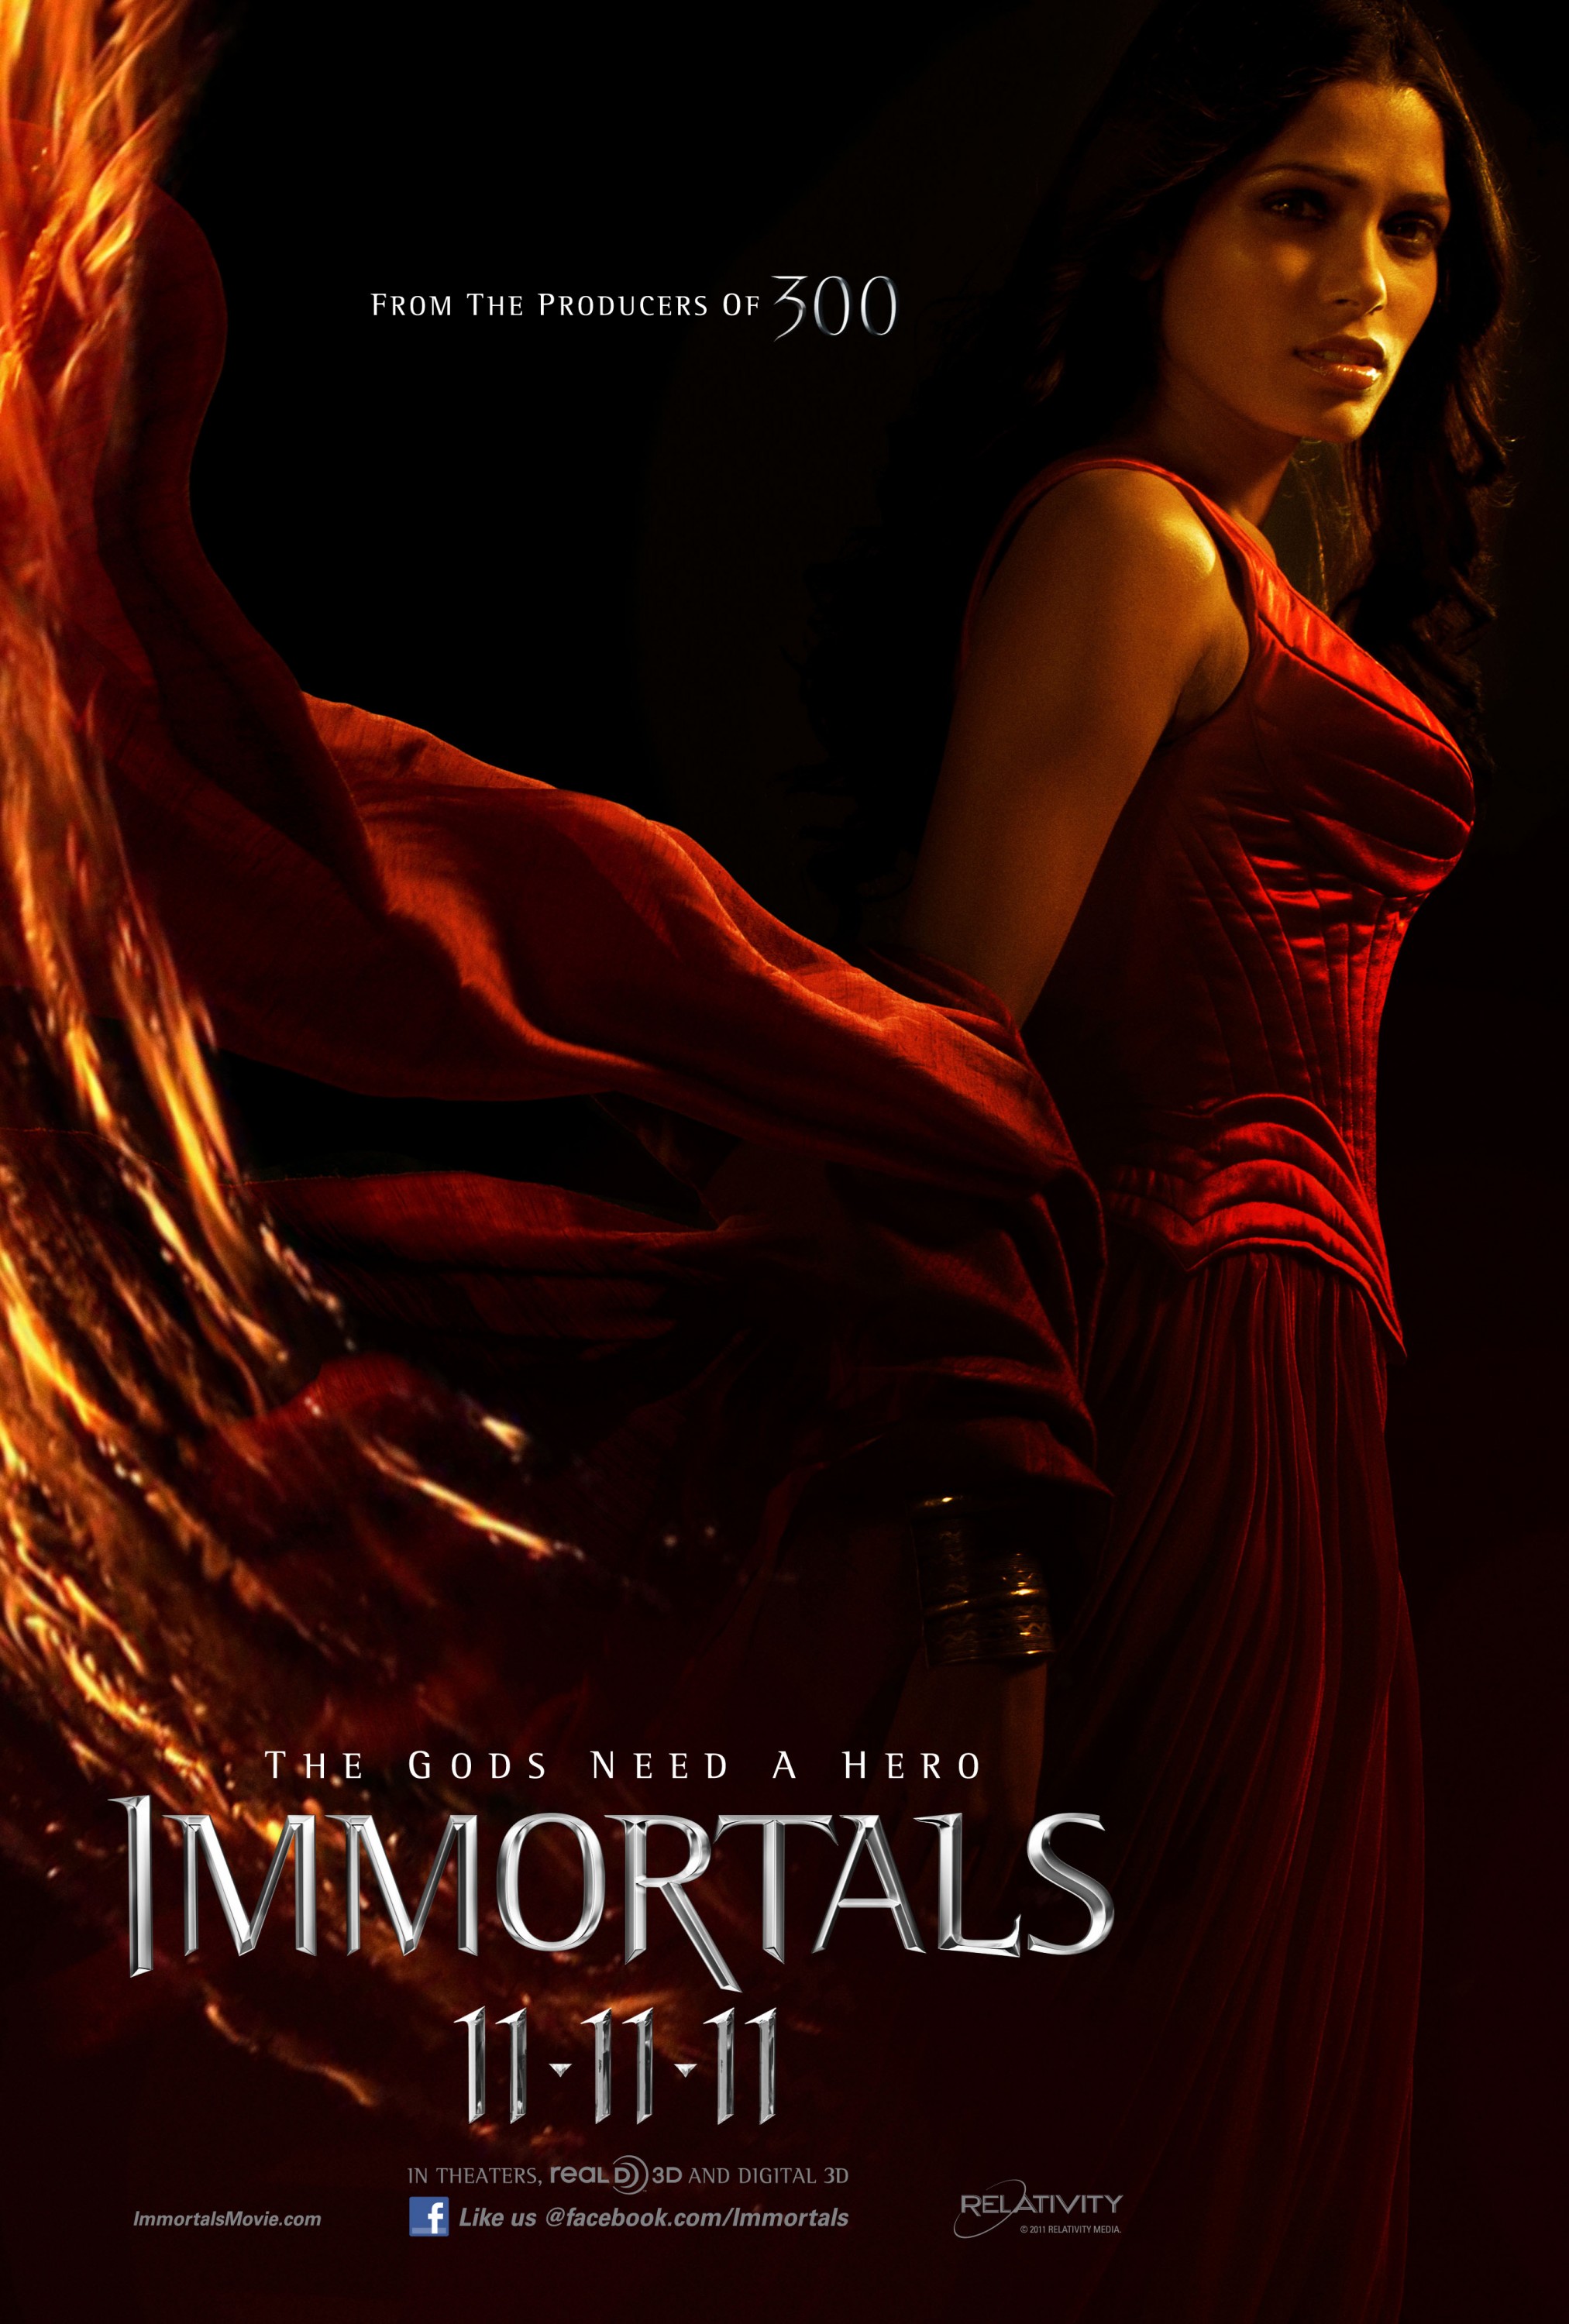 Mega Sized Movie Poster Image for Immortals (#8 of 10)